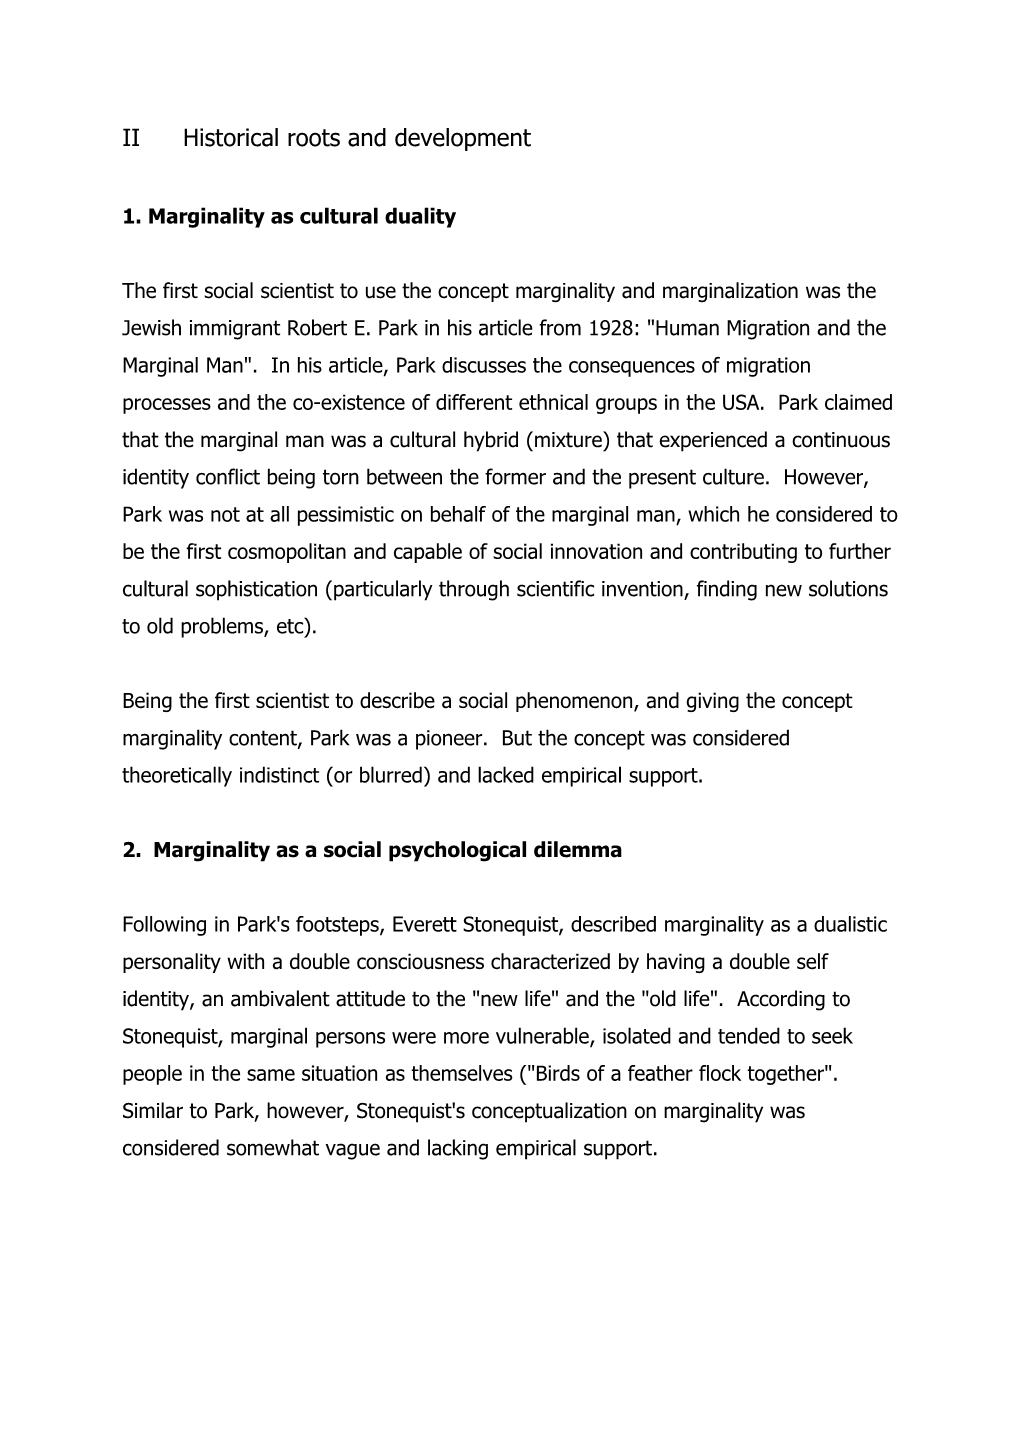 On Marginality and Social Exclusion: Conceptual Clarifications